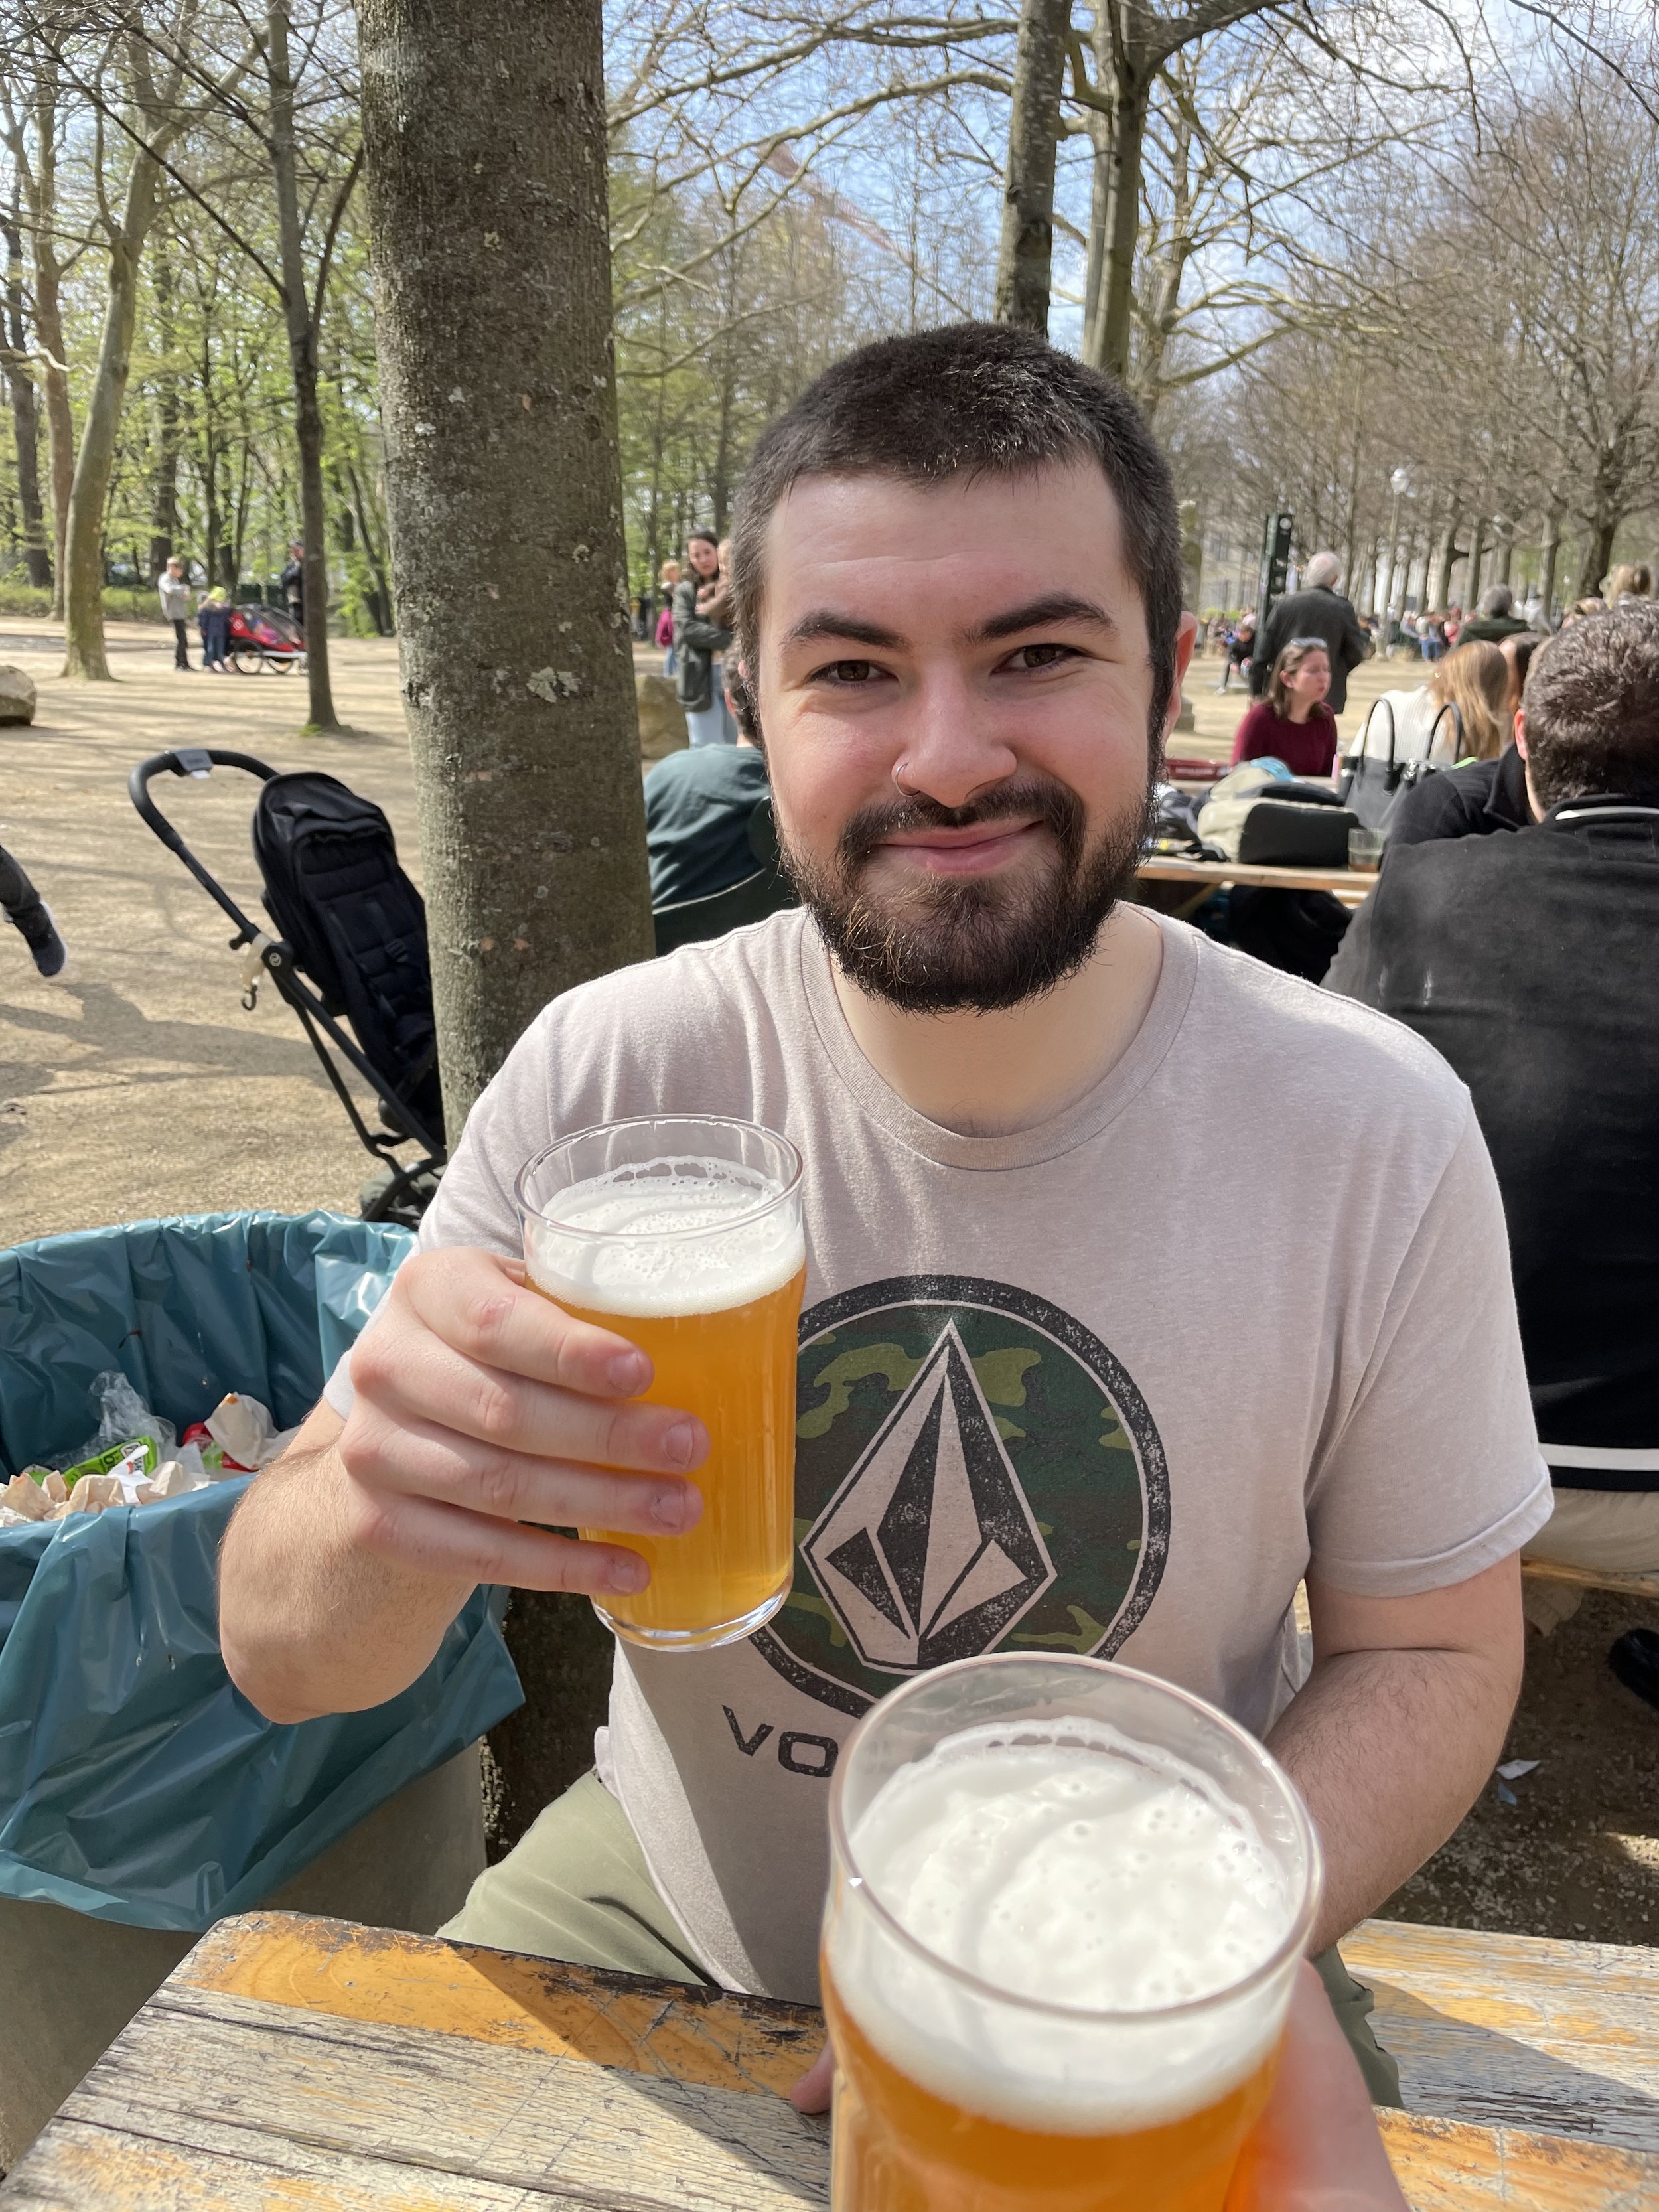  First beer at the Brussels Park beer garden 